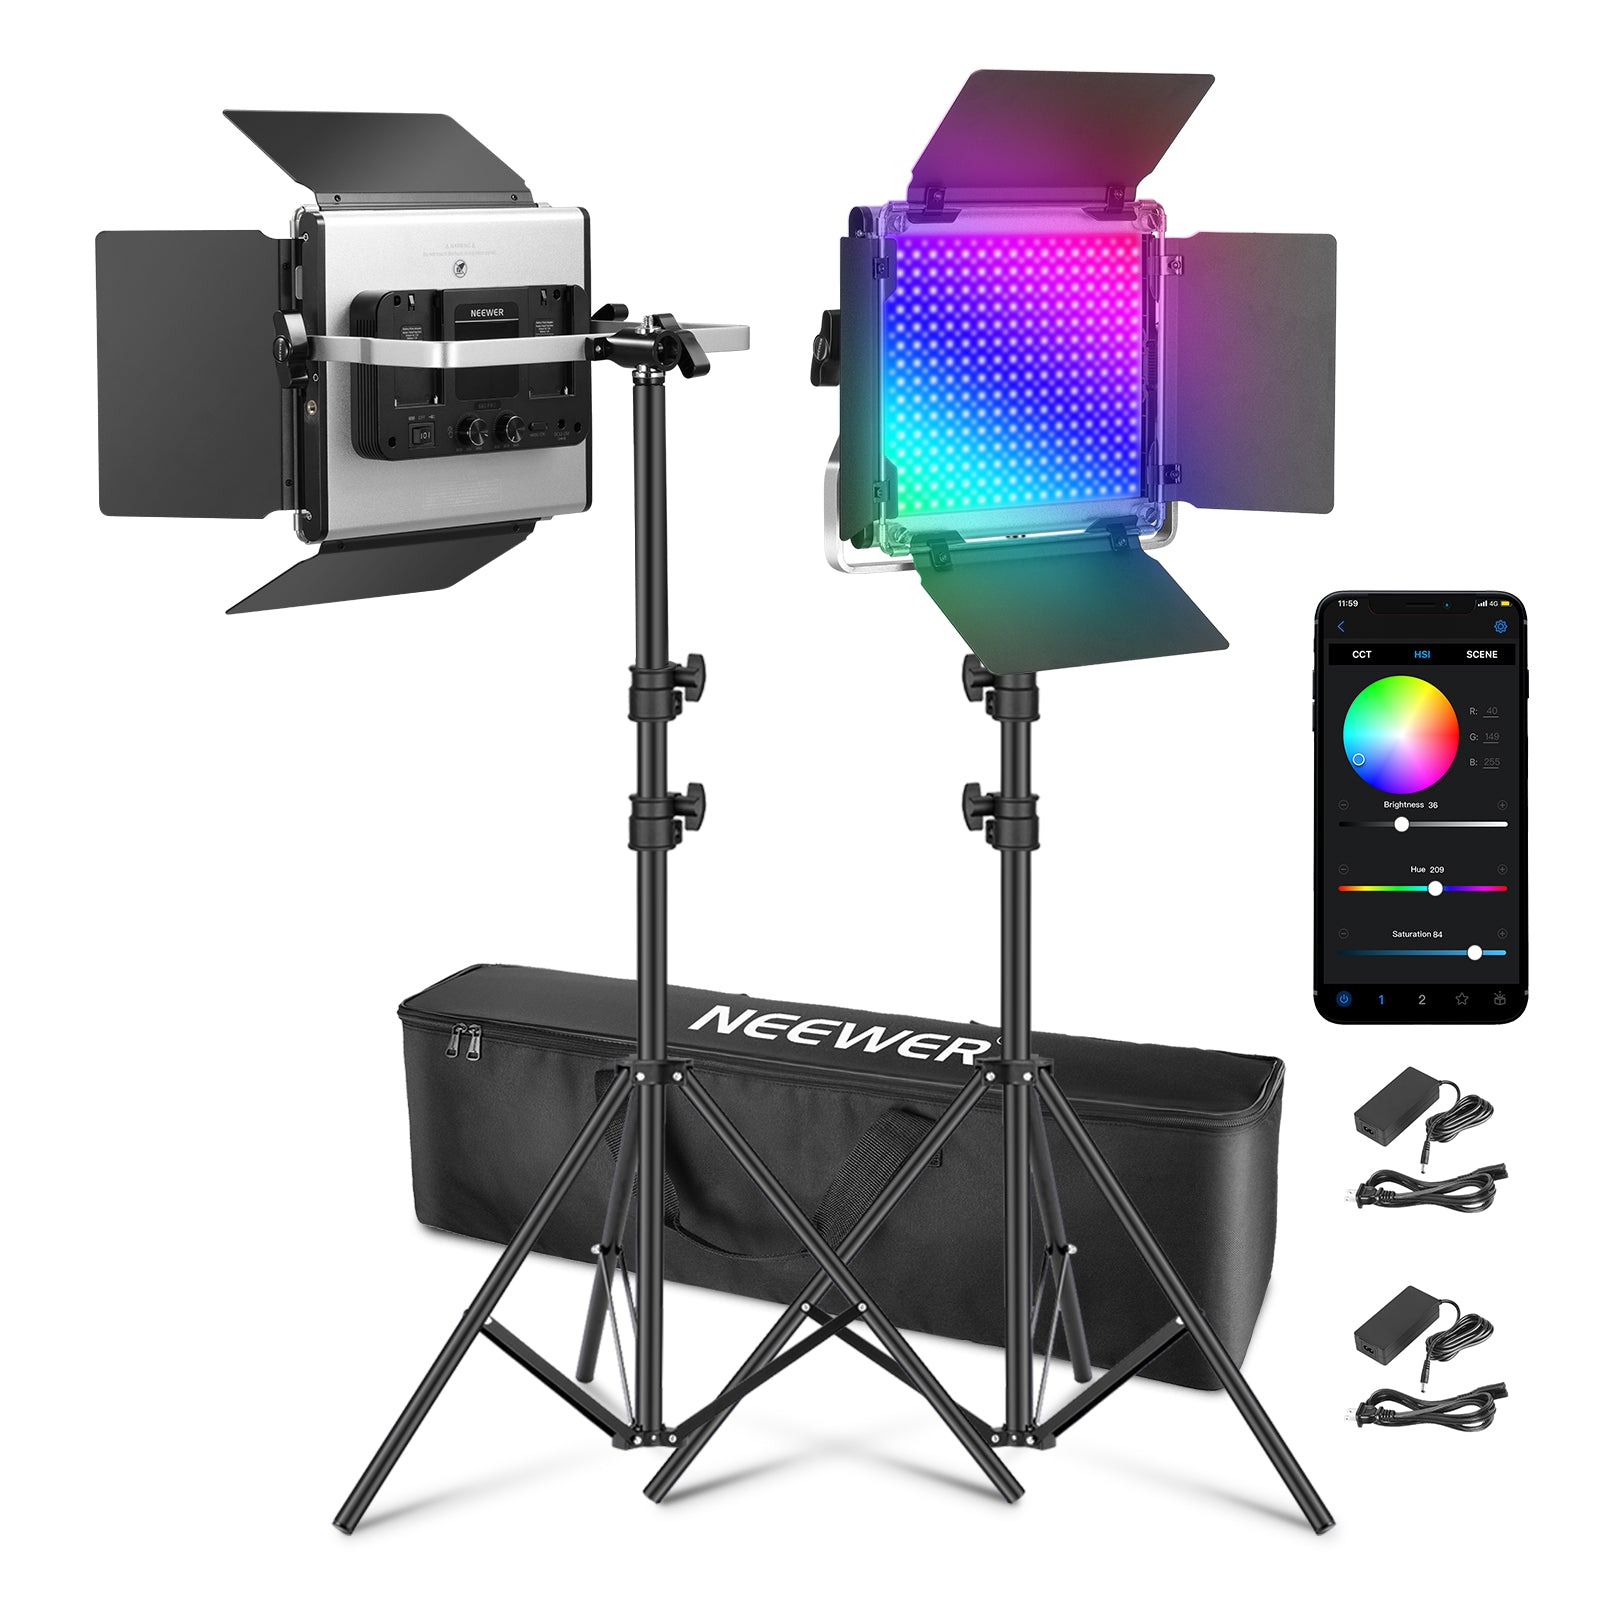 NEEWER 2 Pack Bi Color 660 LED Video Light and Stand India